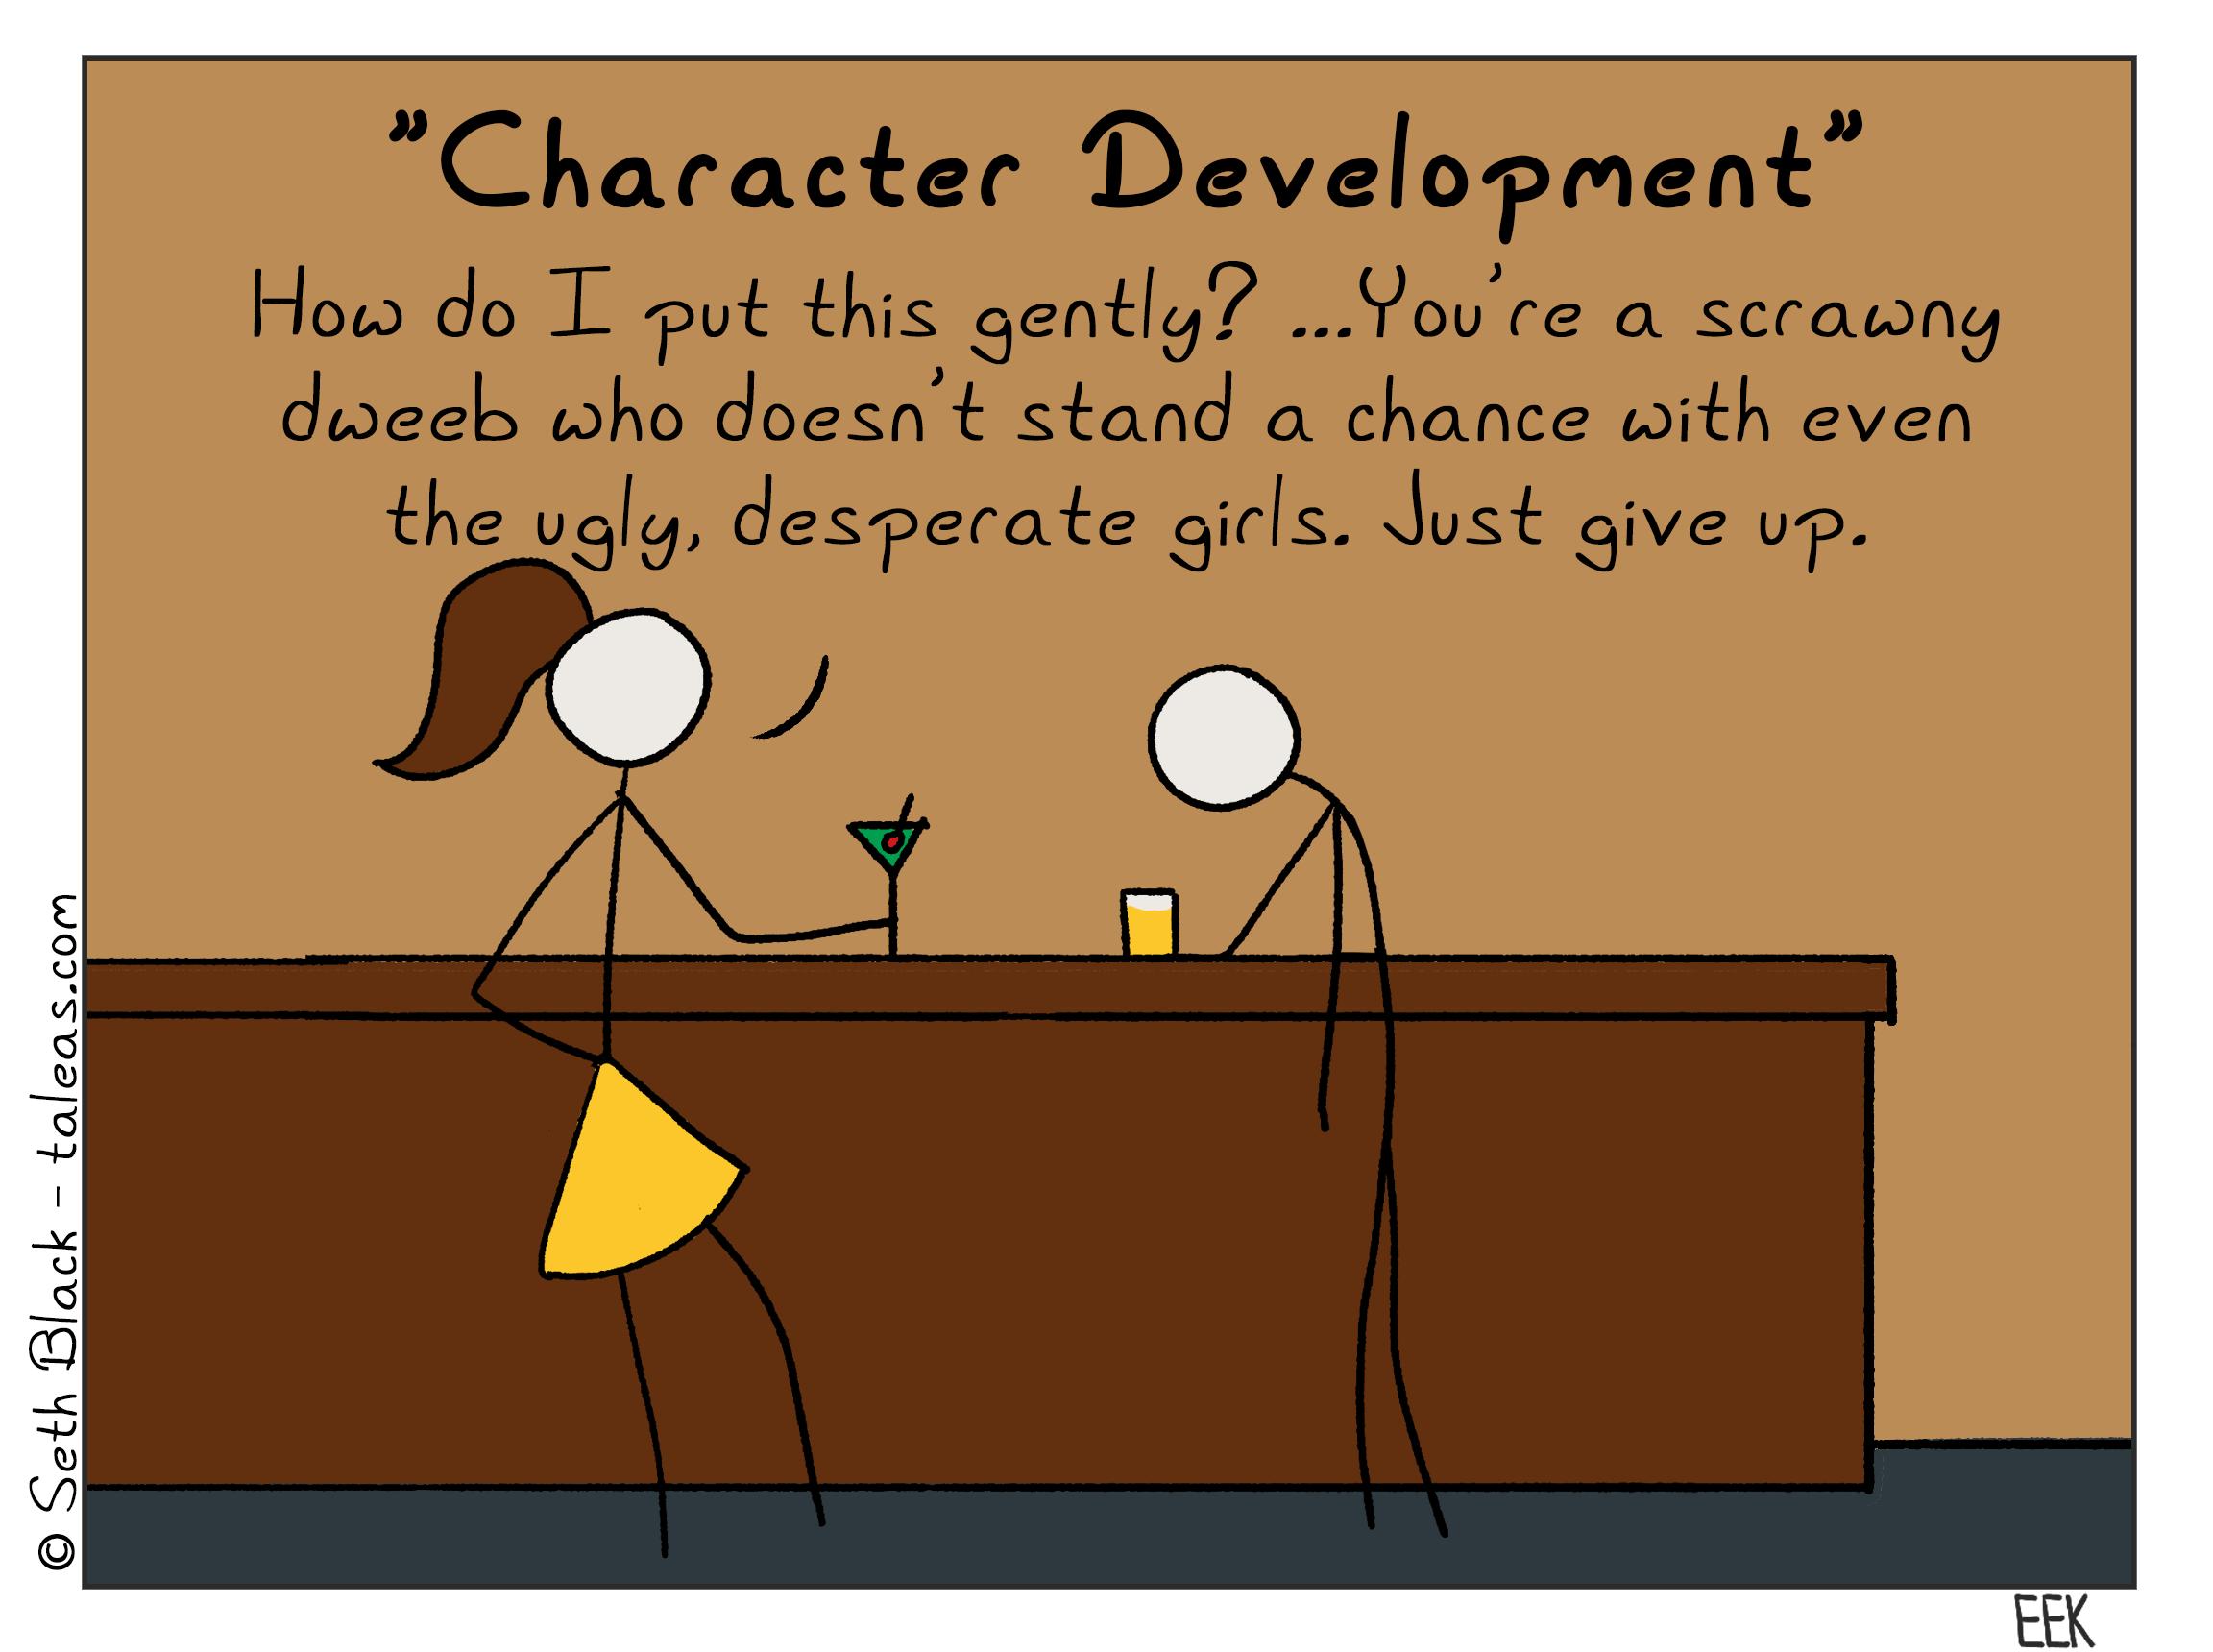 "Character Building" A female stick figure talking to a male stick figure at a bar. "How do I put this gently? You are a scrawny dweeb who doesn't stand a chance with even the ugly, desperate girls. Just give up."